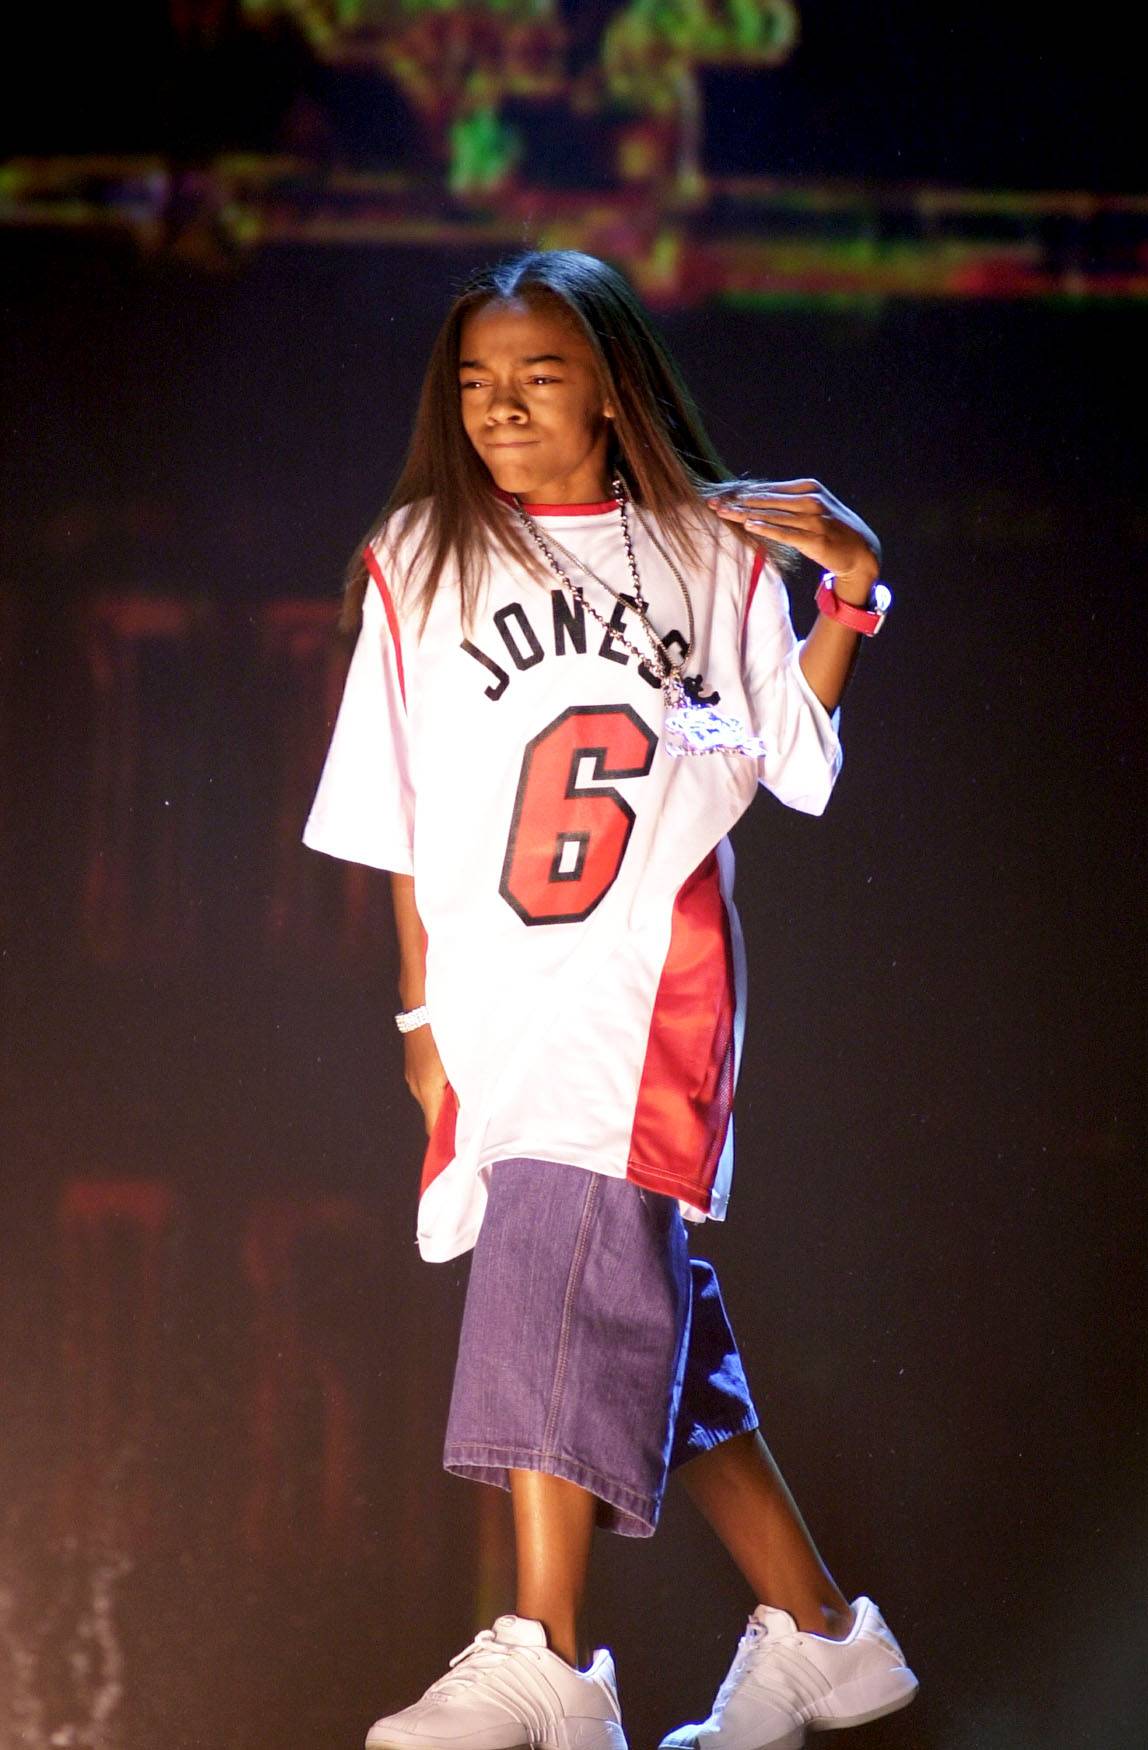 Lil' Bow Wow Image 7 from 2001 BET Awards Performances and